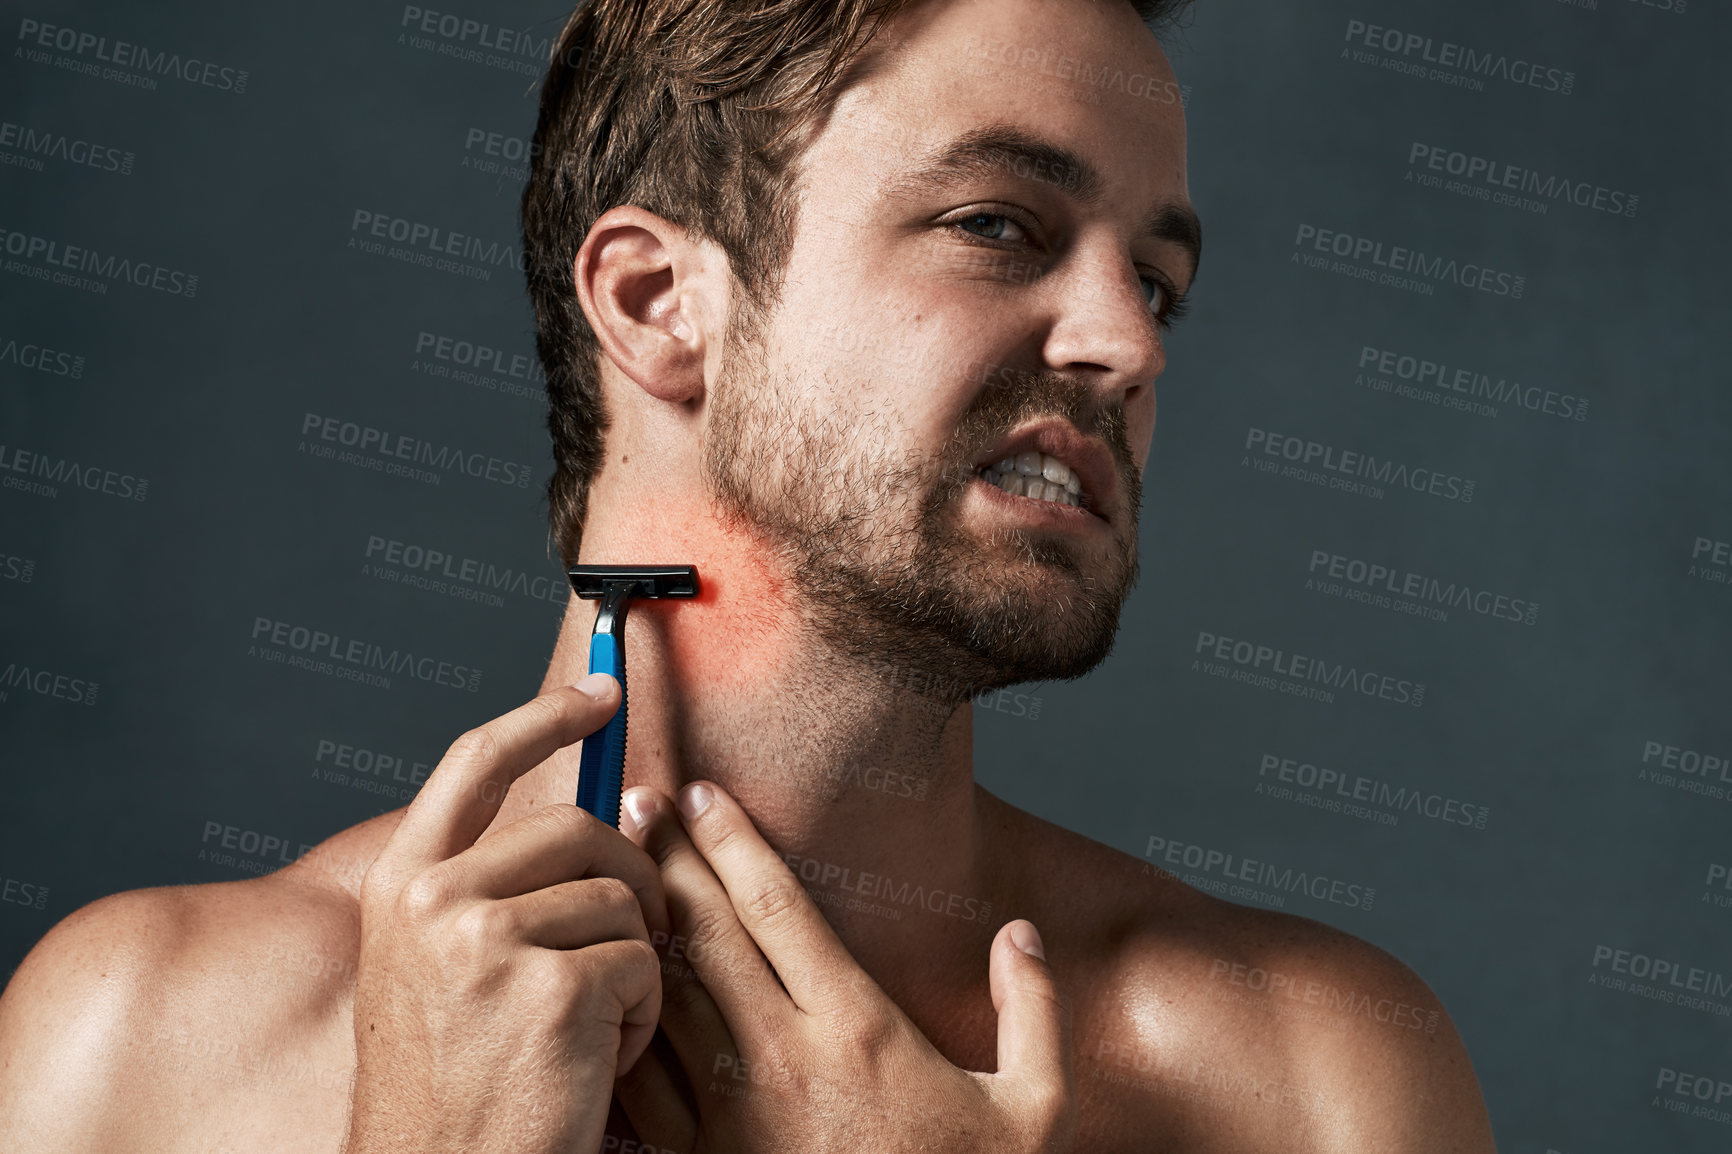 Buy stock photo Cropped shot of a handsome young man grimacing while shaving